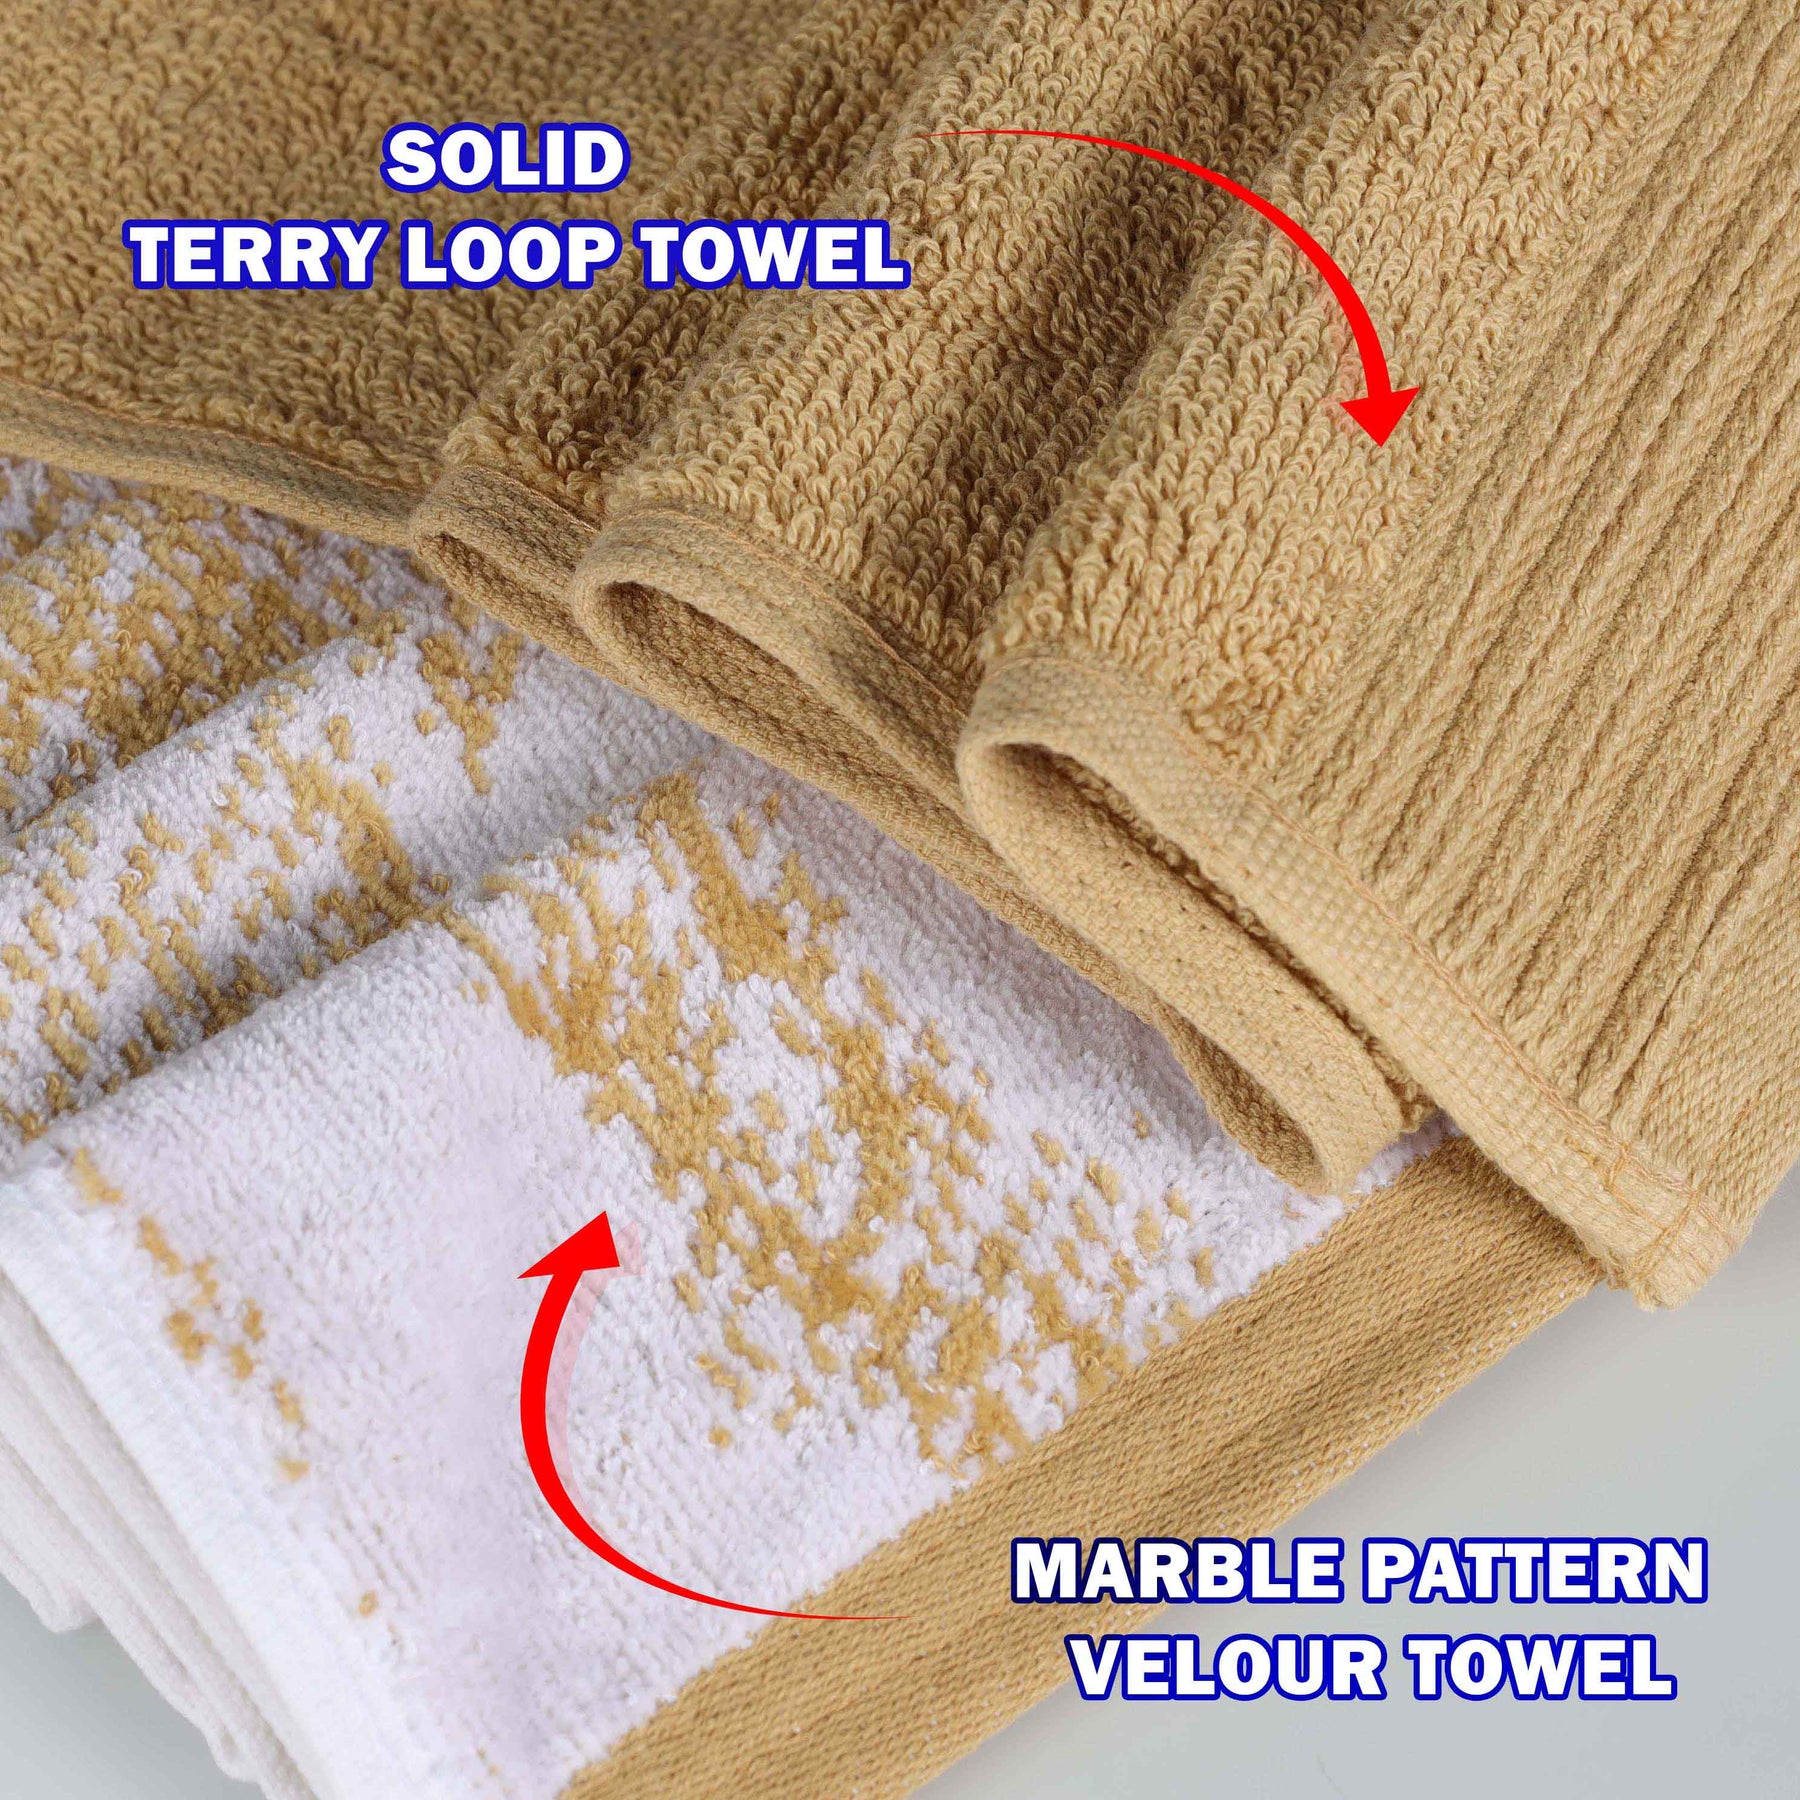 Cotton Marble and Solid Quick Dry 6 Piece Assorted Bathroom Towel Set - Bronze